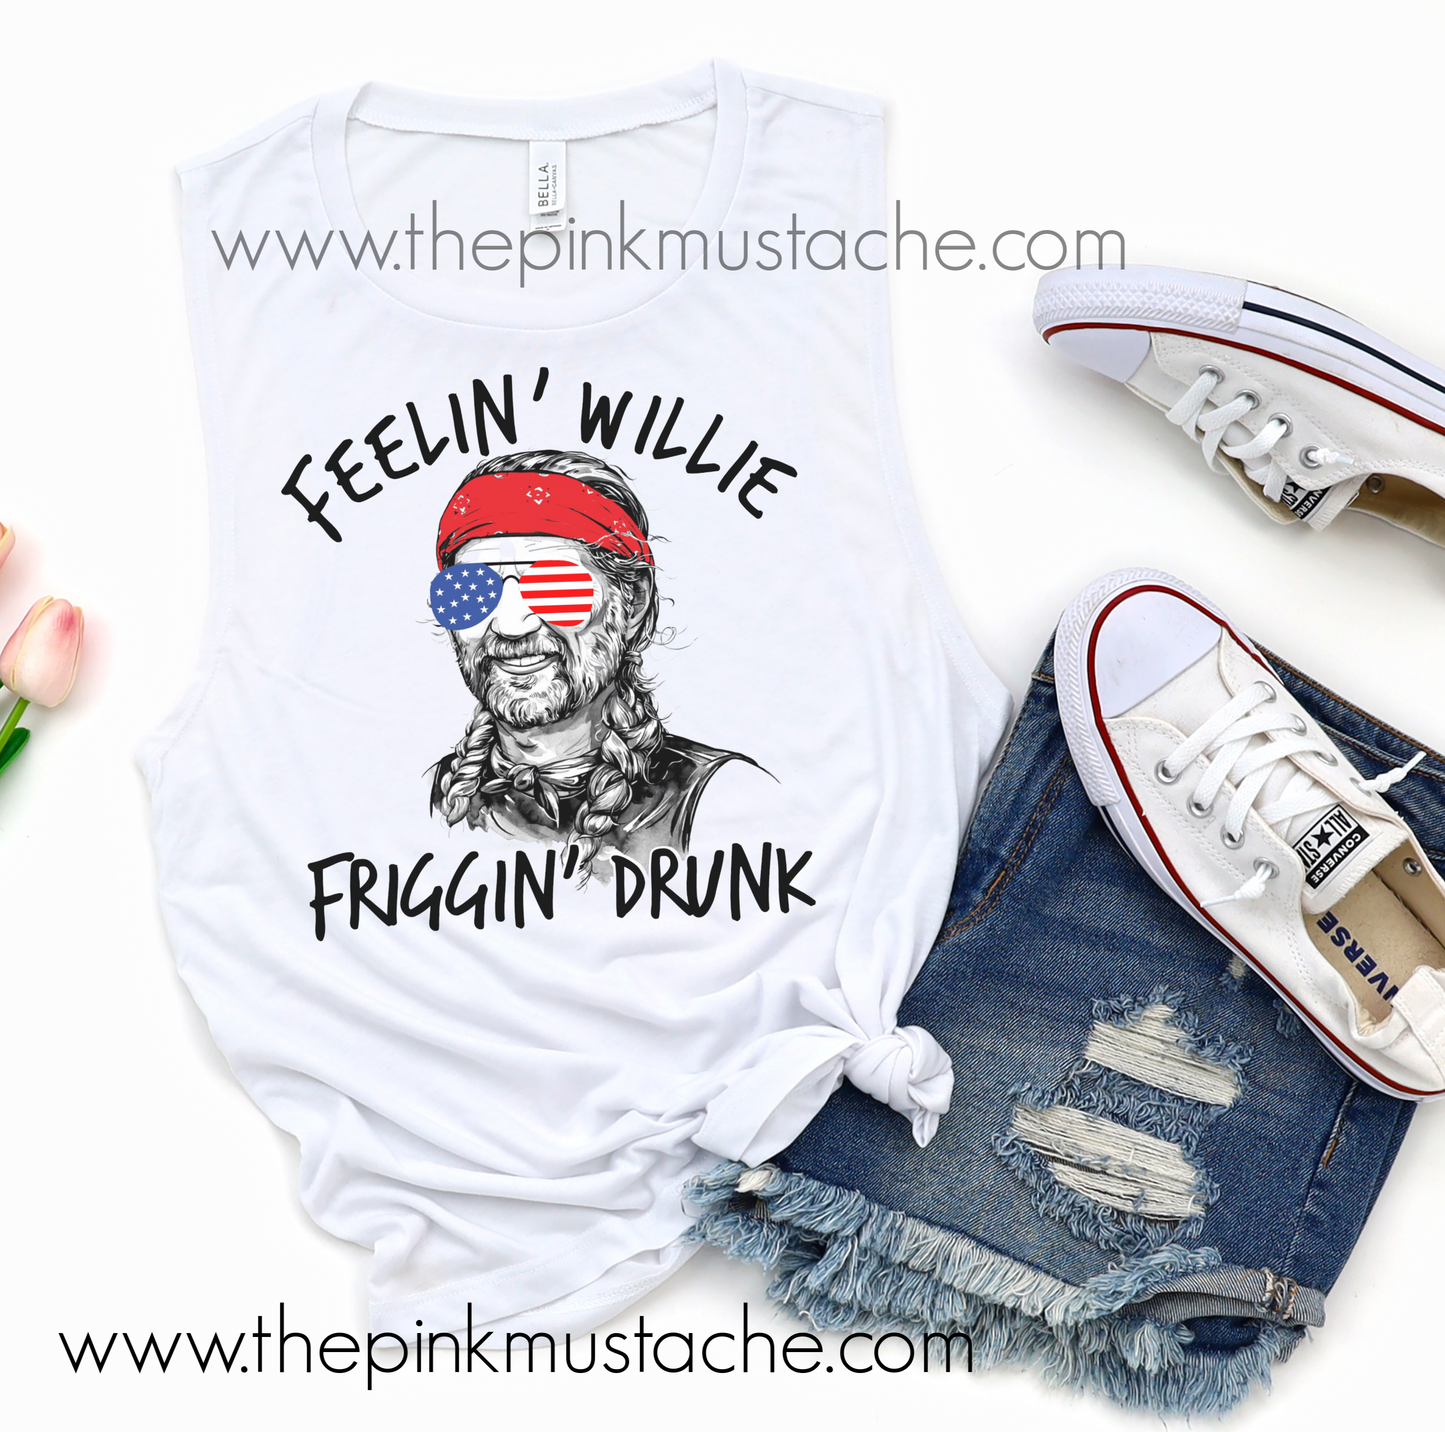 Feelin' Willie Friggin' Drunk Funny 4th of July Muscle Tank / Muscle Tank Top / Mens or Womens Cut Tank Available/ Willie Nelson